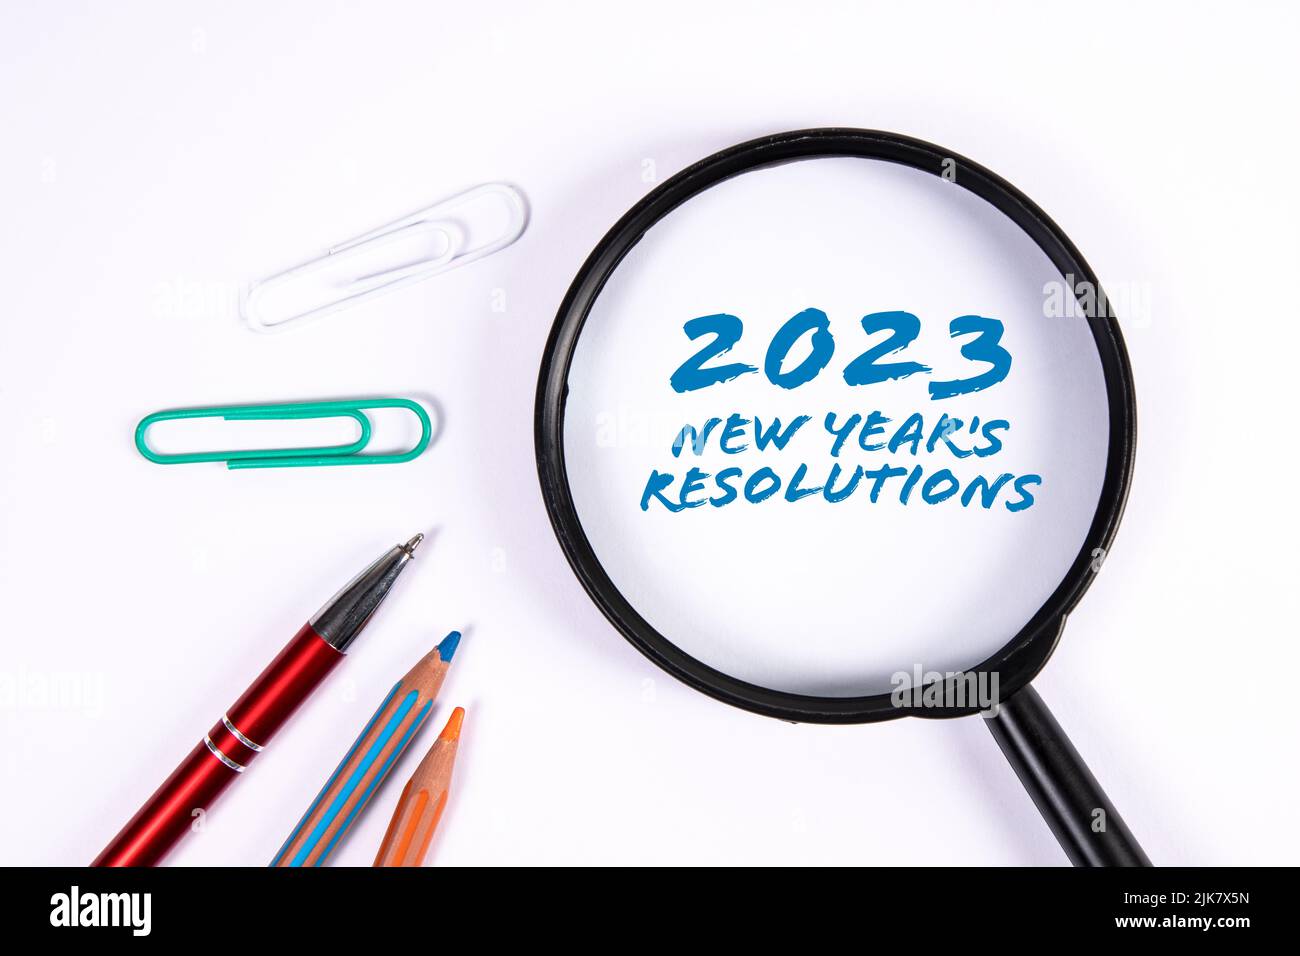 2023 New Year's Resolutions. Magnifying glass on a white background. Stock Photo